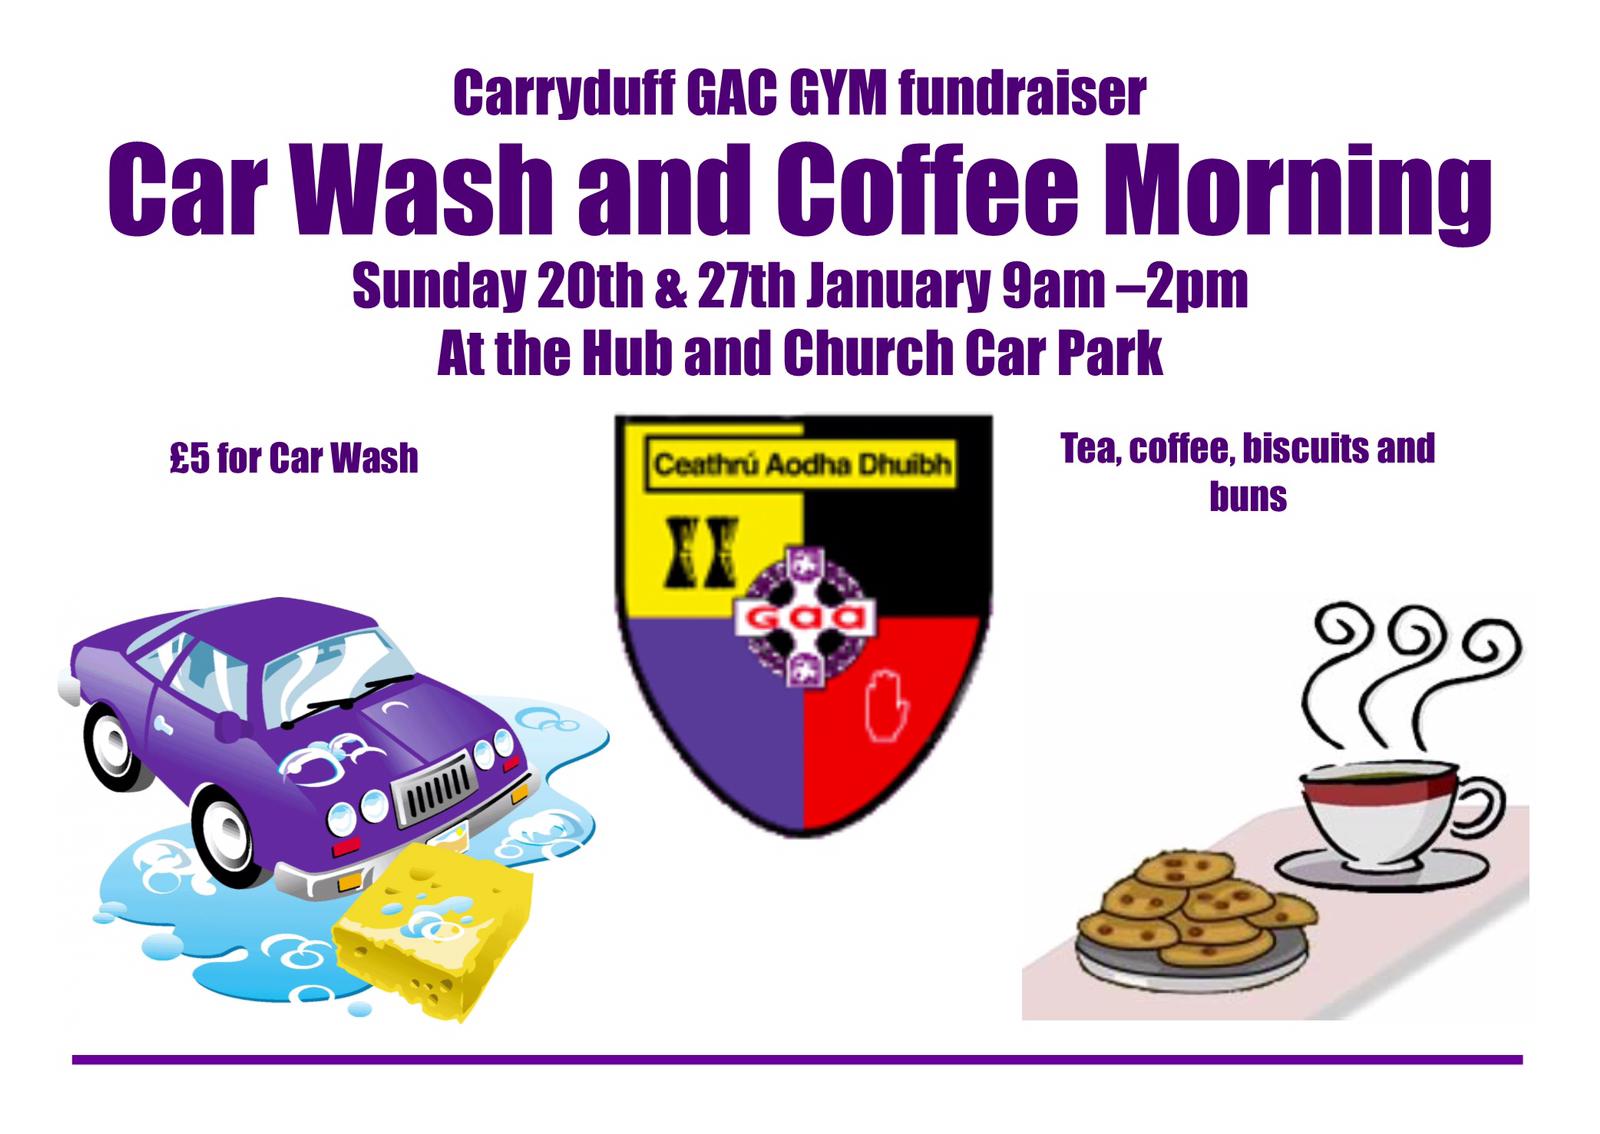 Car wash and coffee morning !